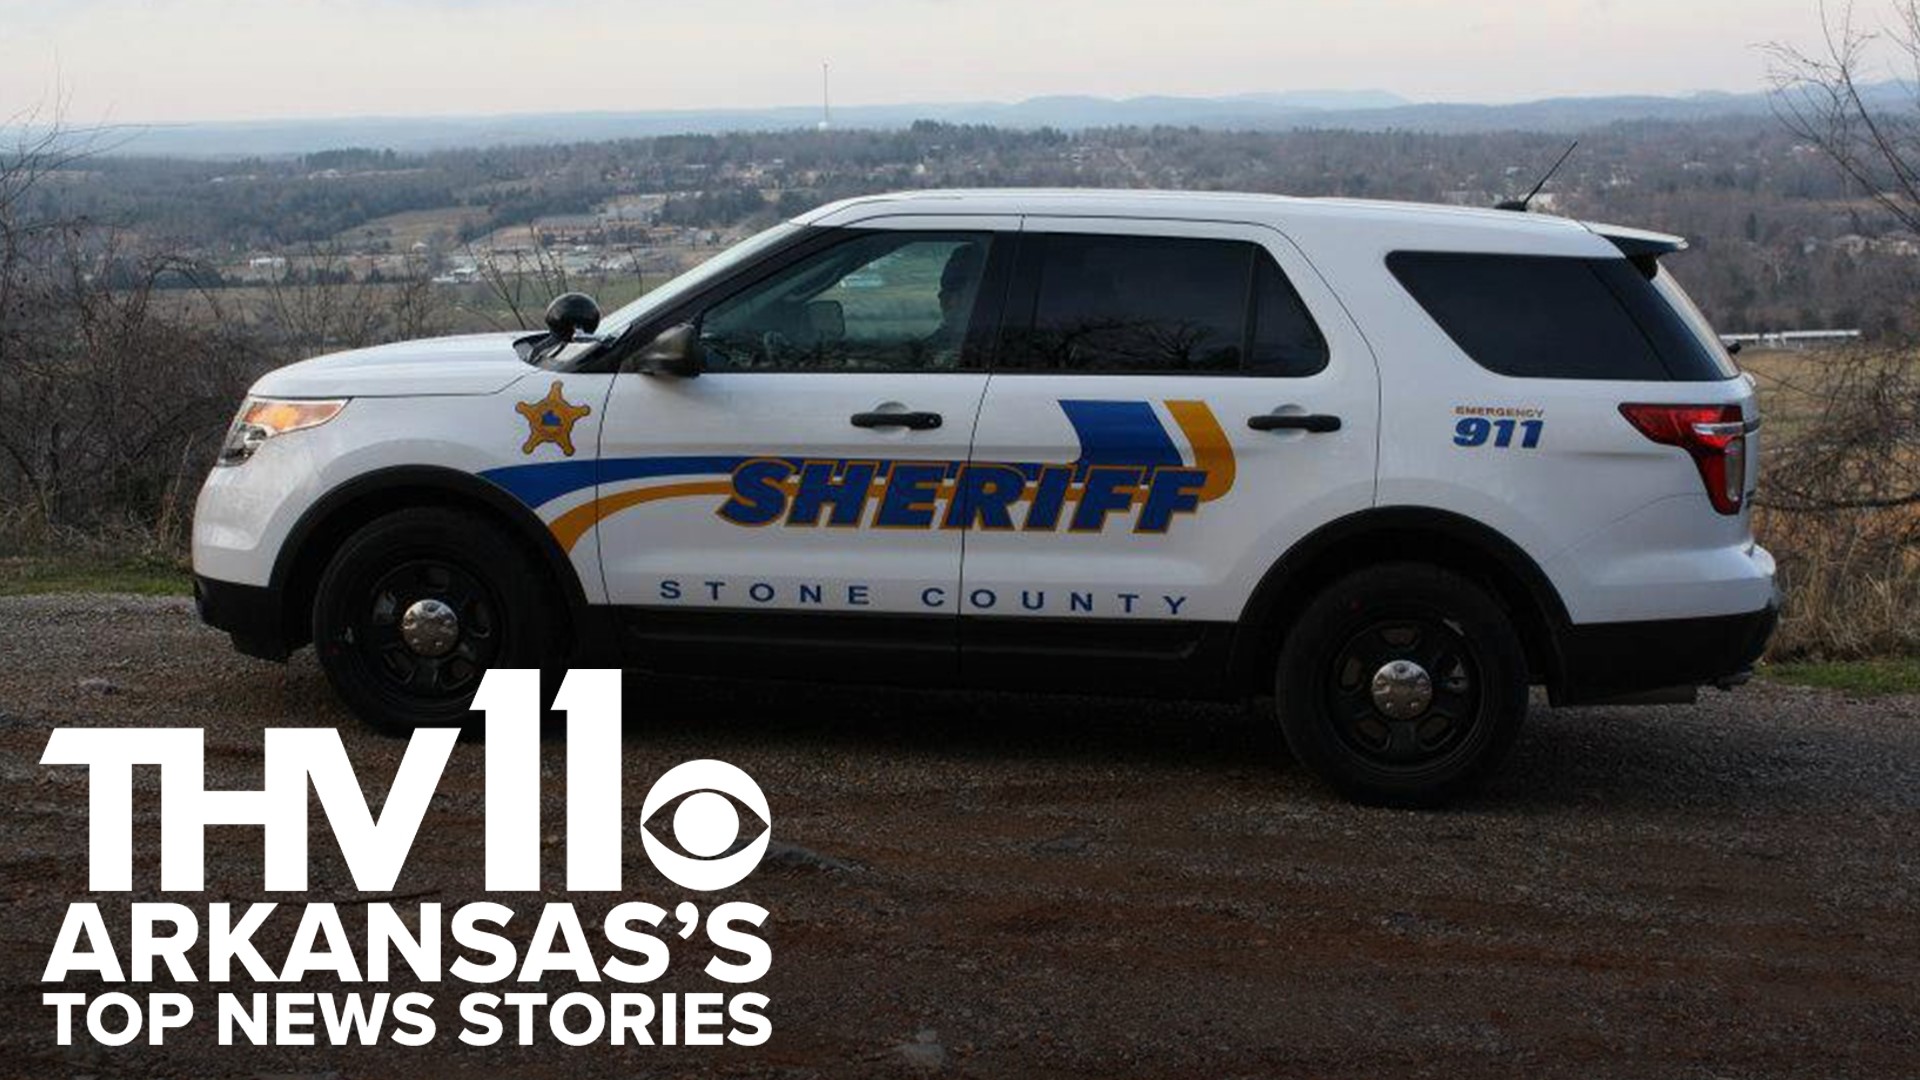 Mackailyn Johnson covers Arkansas's top news stories, including the latest on the quadruple homicide investigating that happened in Stone County Thursday night.